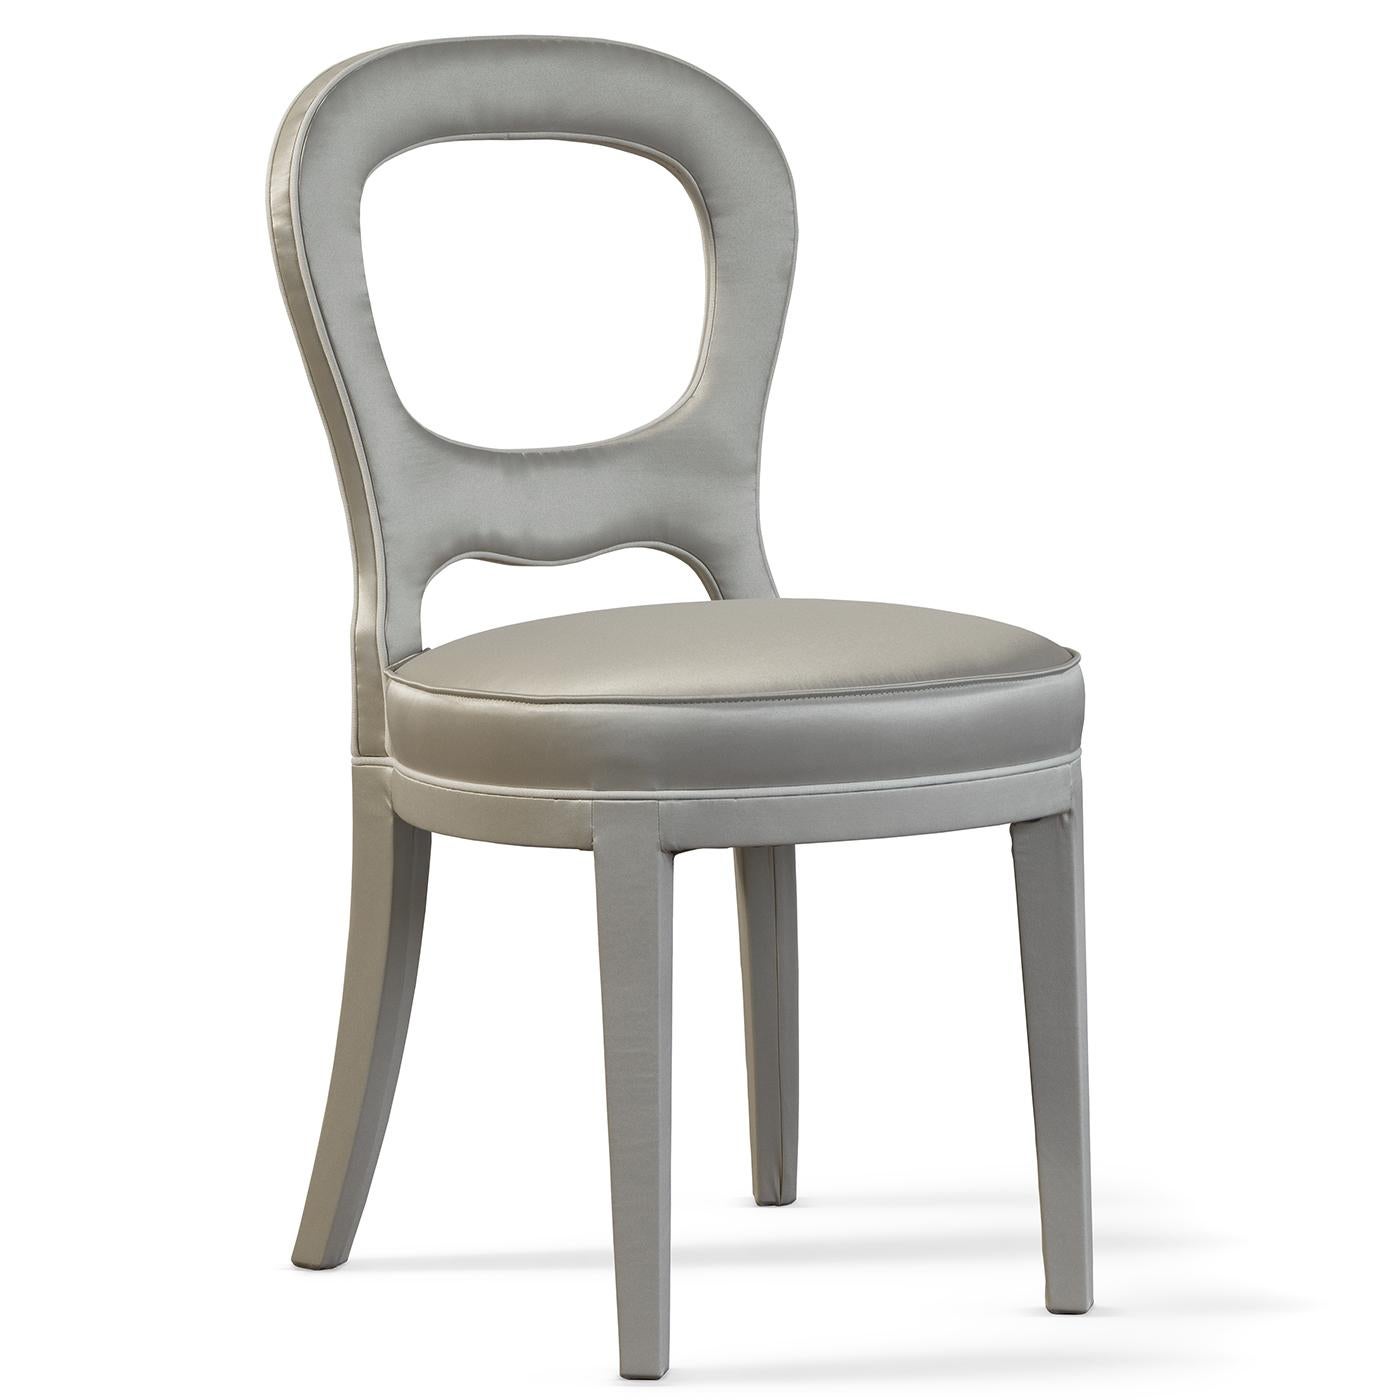 This elegant chair is part of the Gilda collection. Its solid beechwood structure is timeless and sophisticated and boasts a cut-out backseat. The entire shape of the piece is covered in a non-removable white fabric that lends it a subtle and